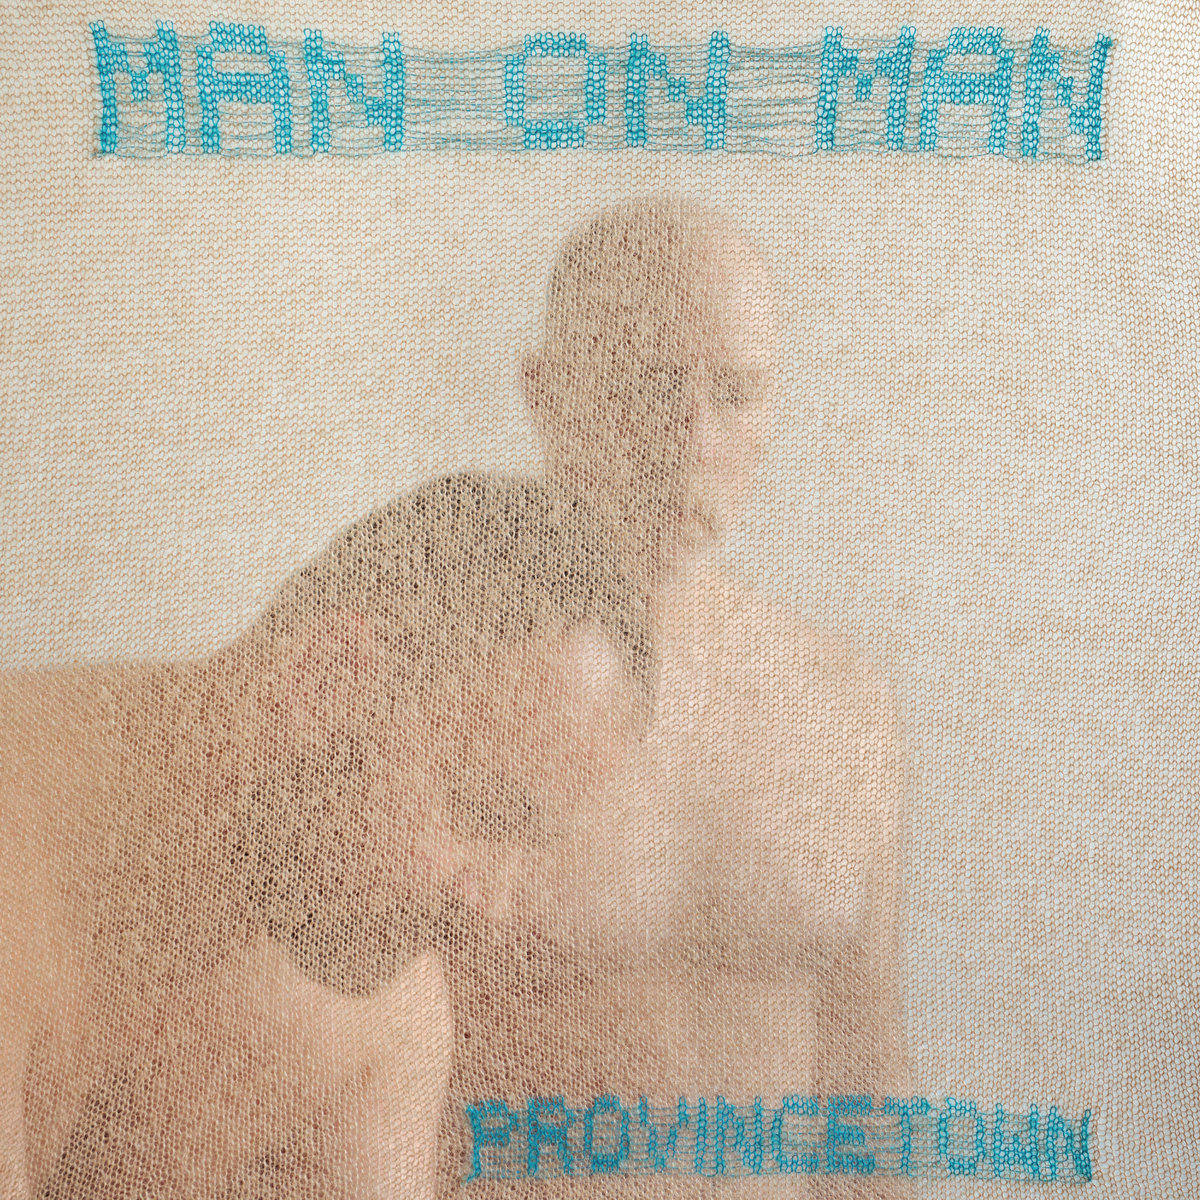 Man on Man prep new LP, touring with Le Tigre & more -- watch the 'Showgirls' video brooklynvegan.com/man-on-man-pre…